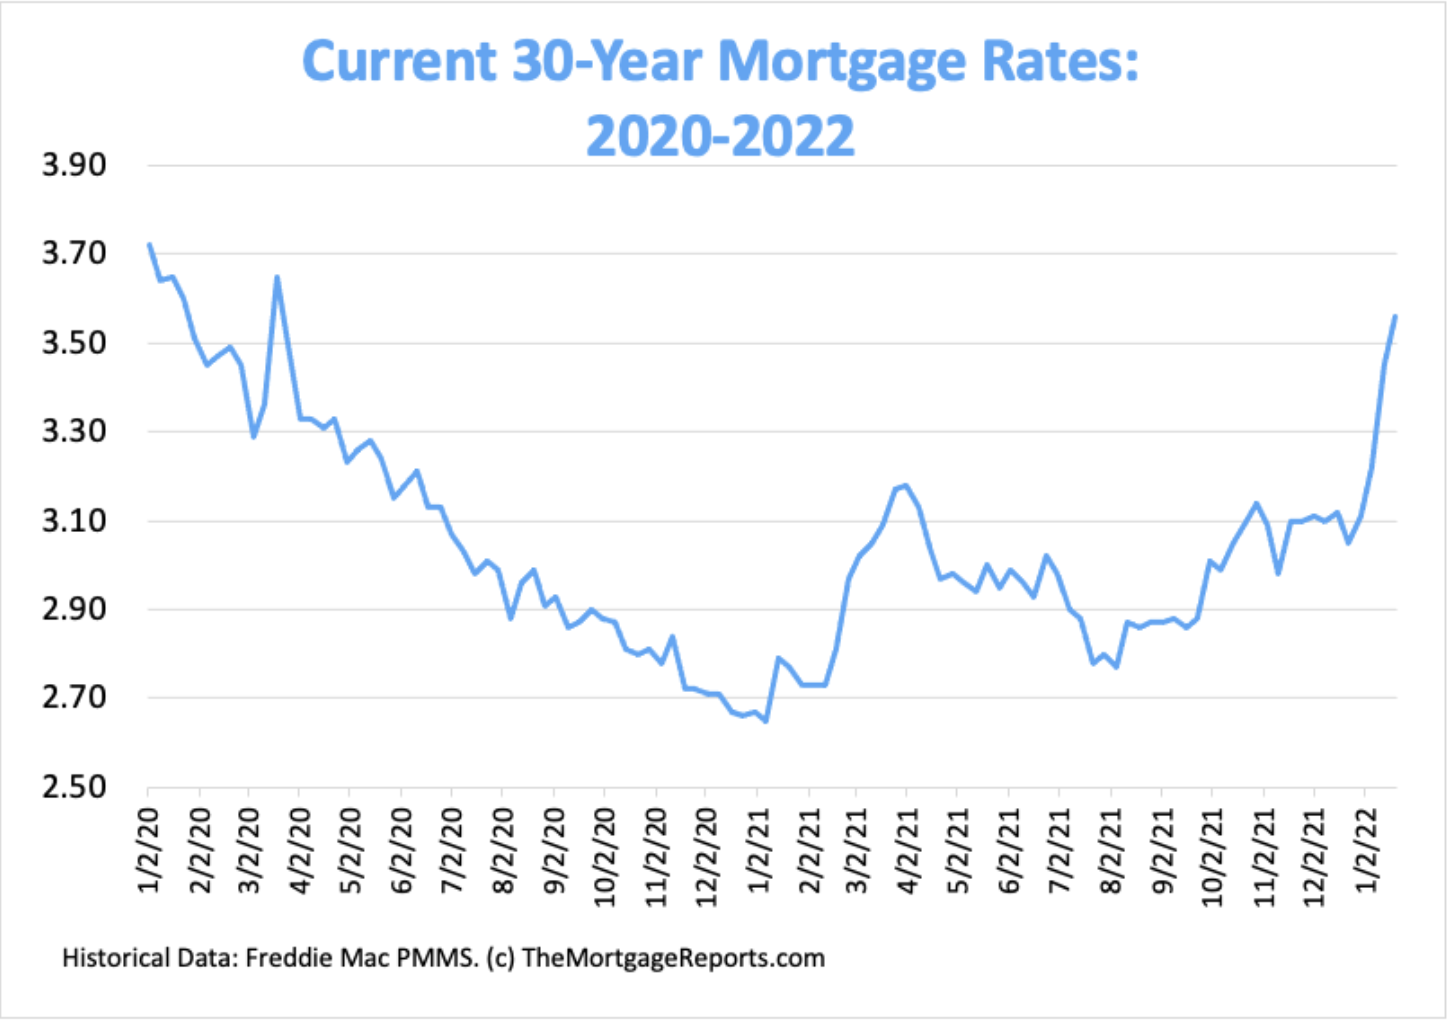 Interest Rates Since January 2020